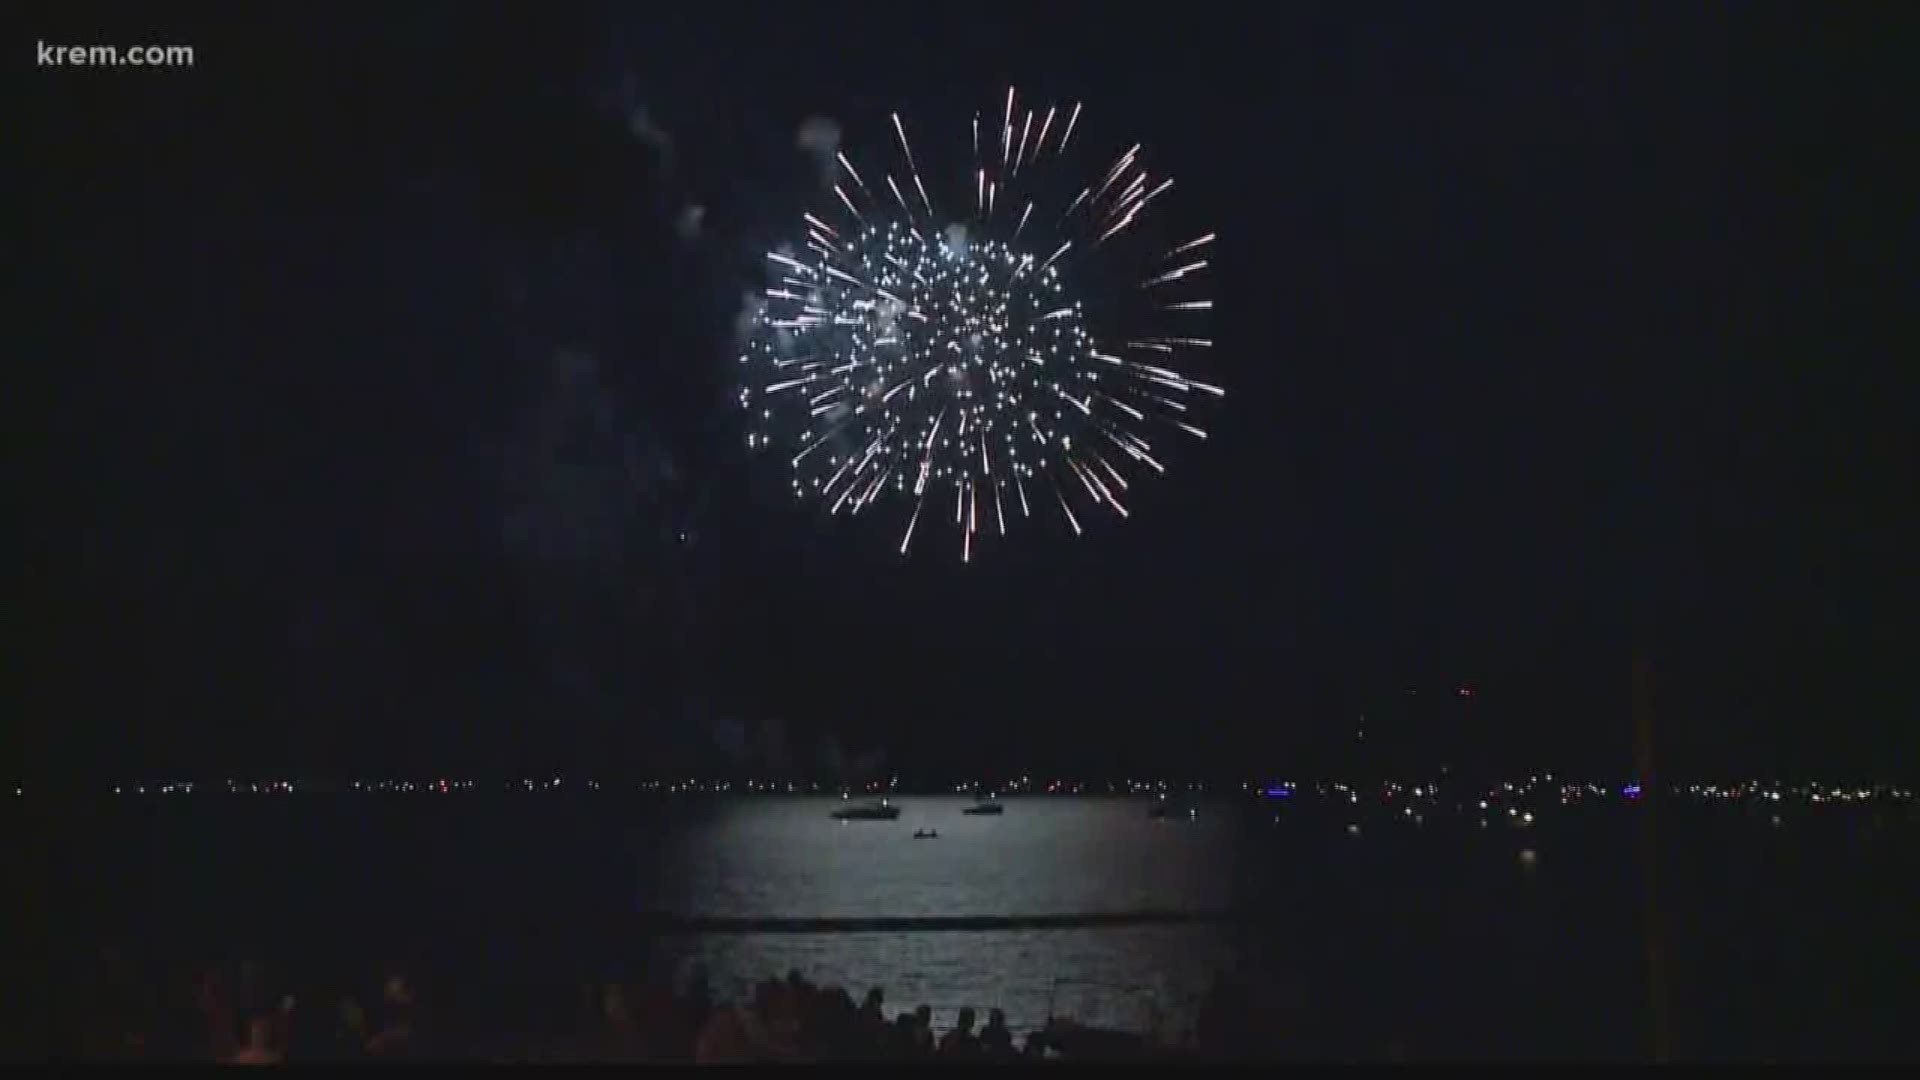 The Coeur d'Alene Chamber of Commerce decided to cancel the Fourth of July fireworks, but move forward with the parade and festivities in Coeur d'Alene Park.